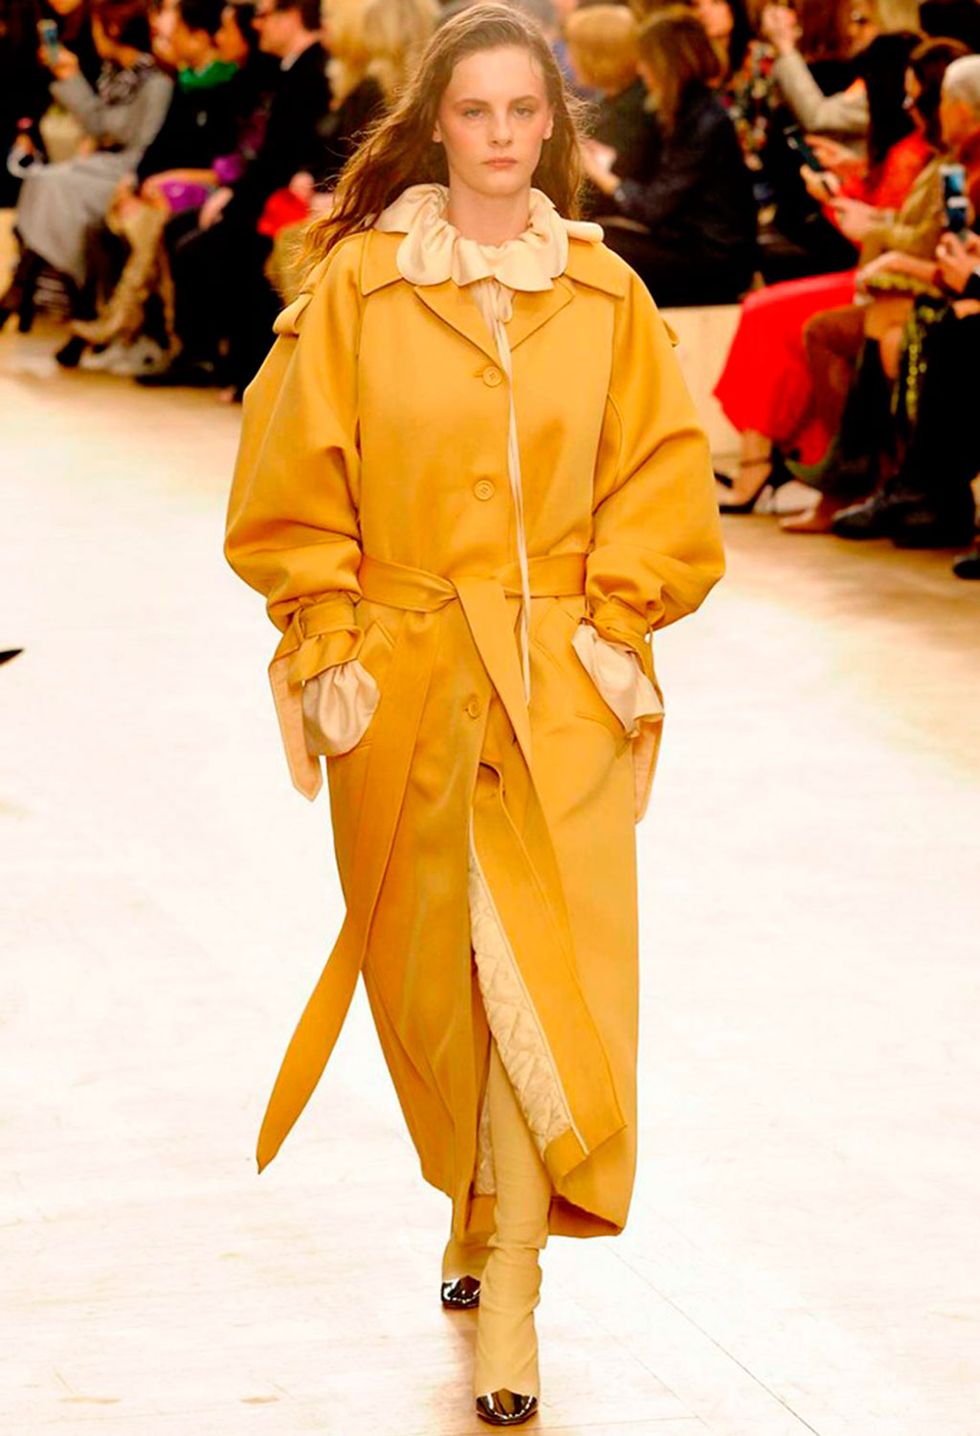 Fashion model, Fashion, Fashion show, Runway, Clothing, Yellow, Outerwear, Event, Public event, Haute couture, 